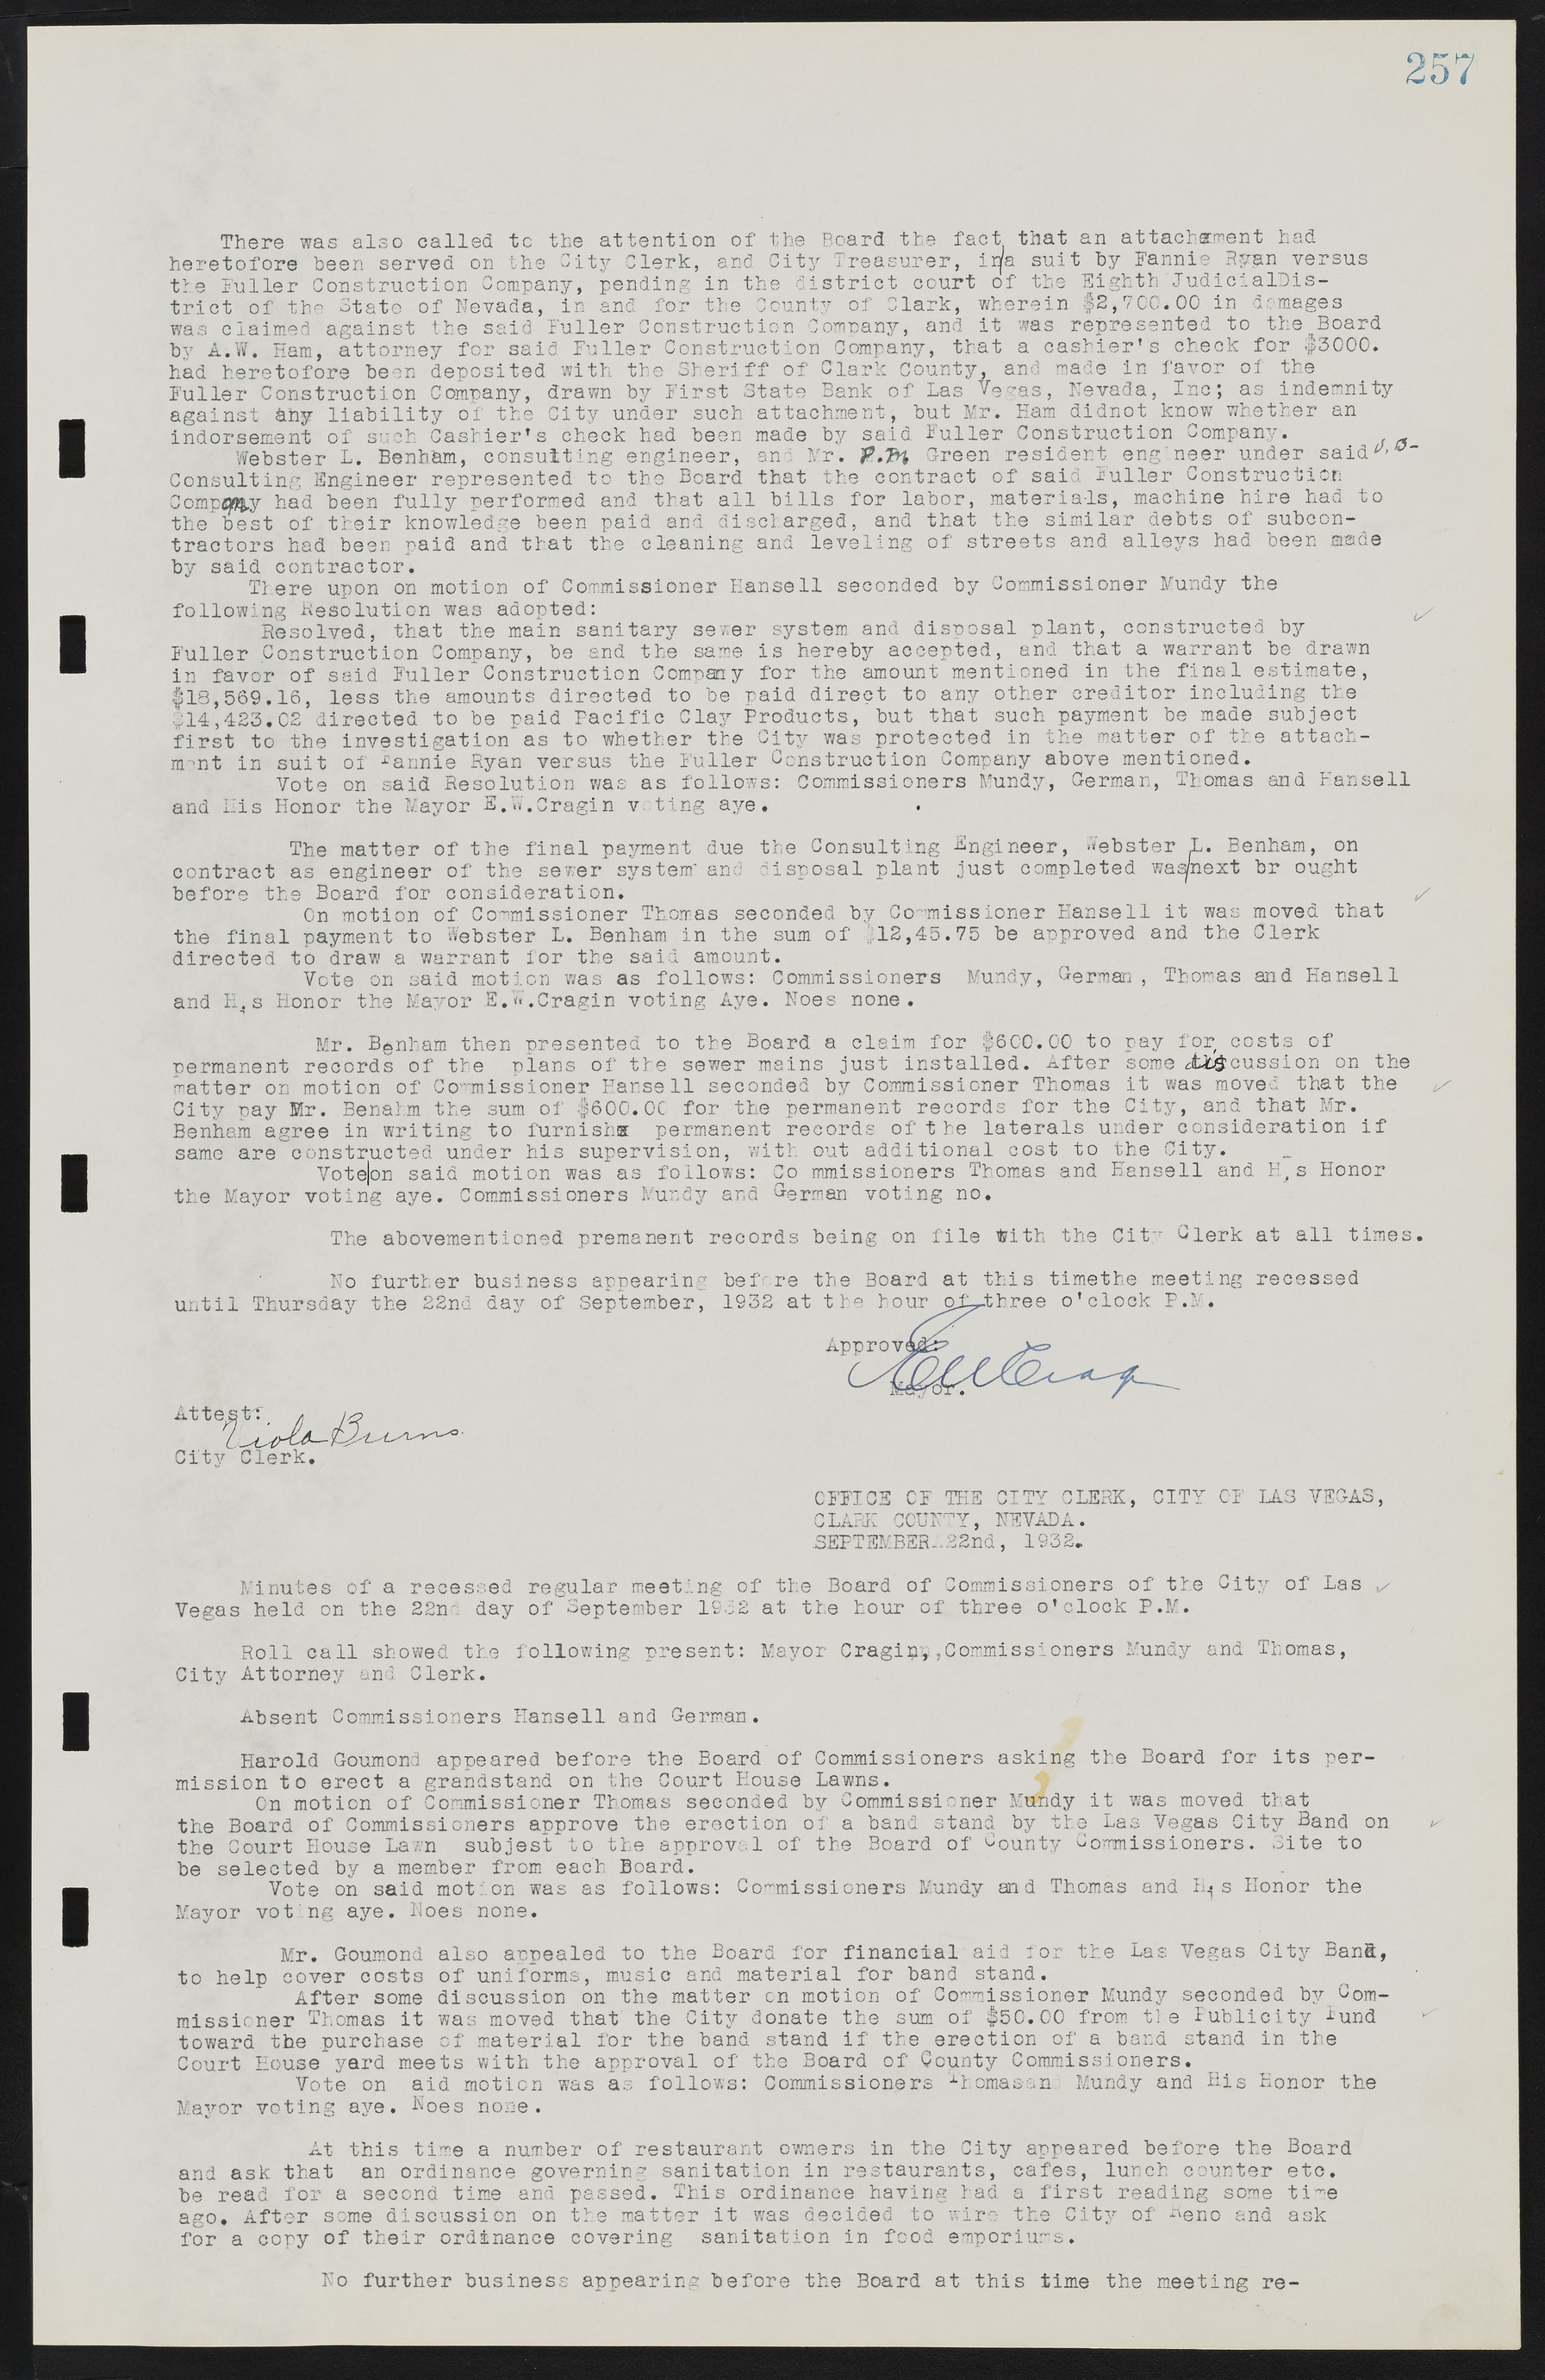 Las Vegas City Commission Minutes, May 14, 1929 to February 11, 1937, lvc000003-263